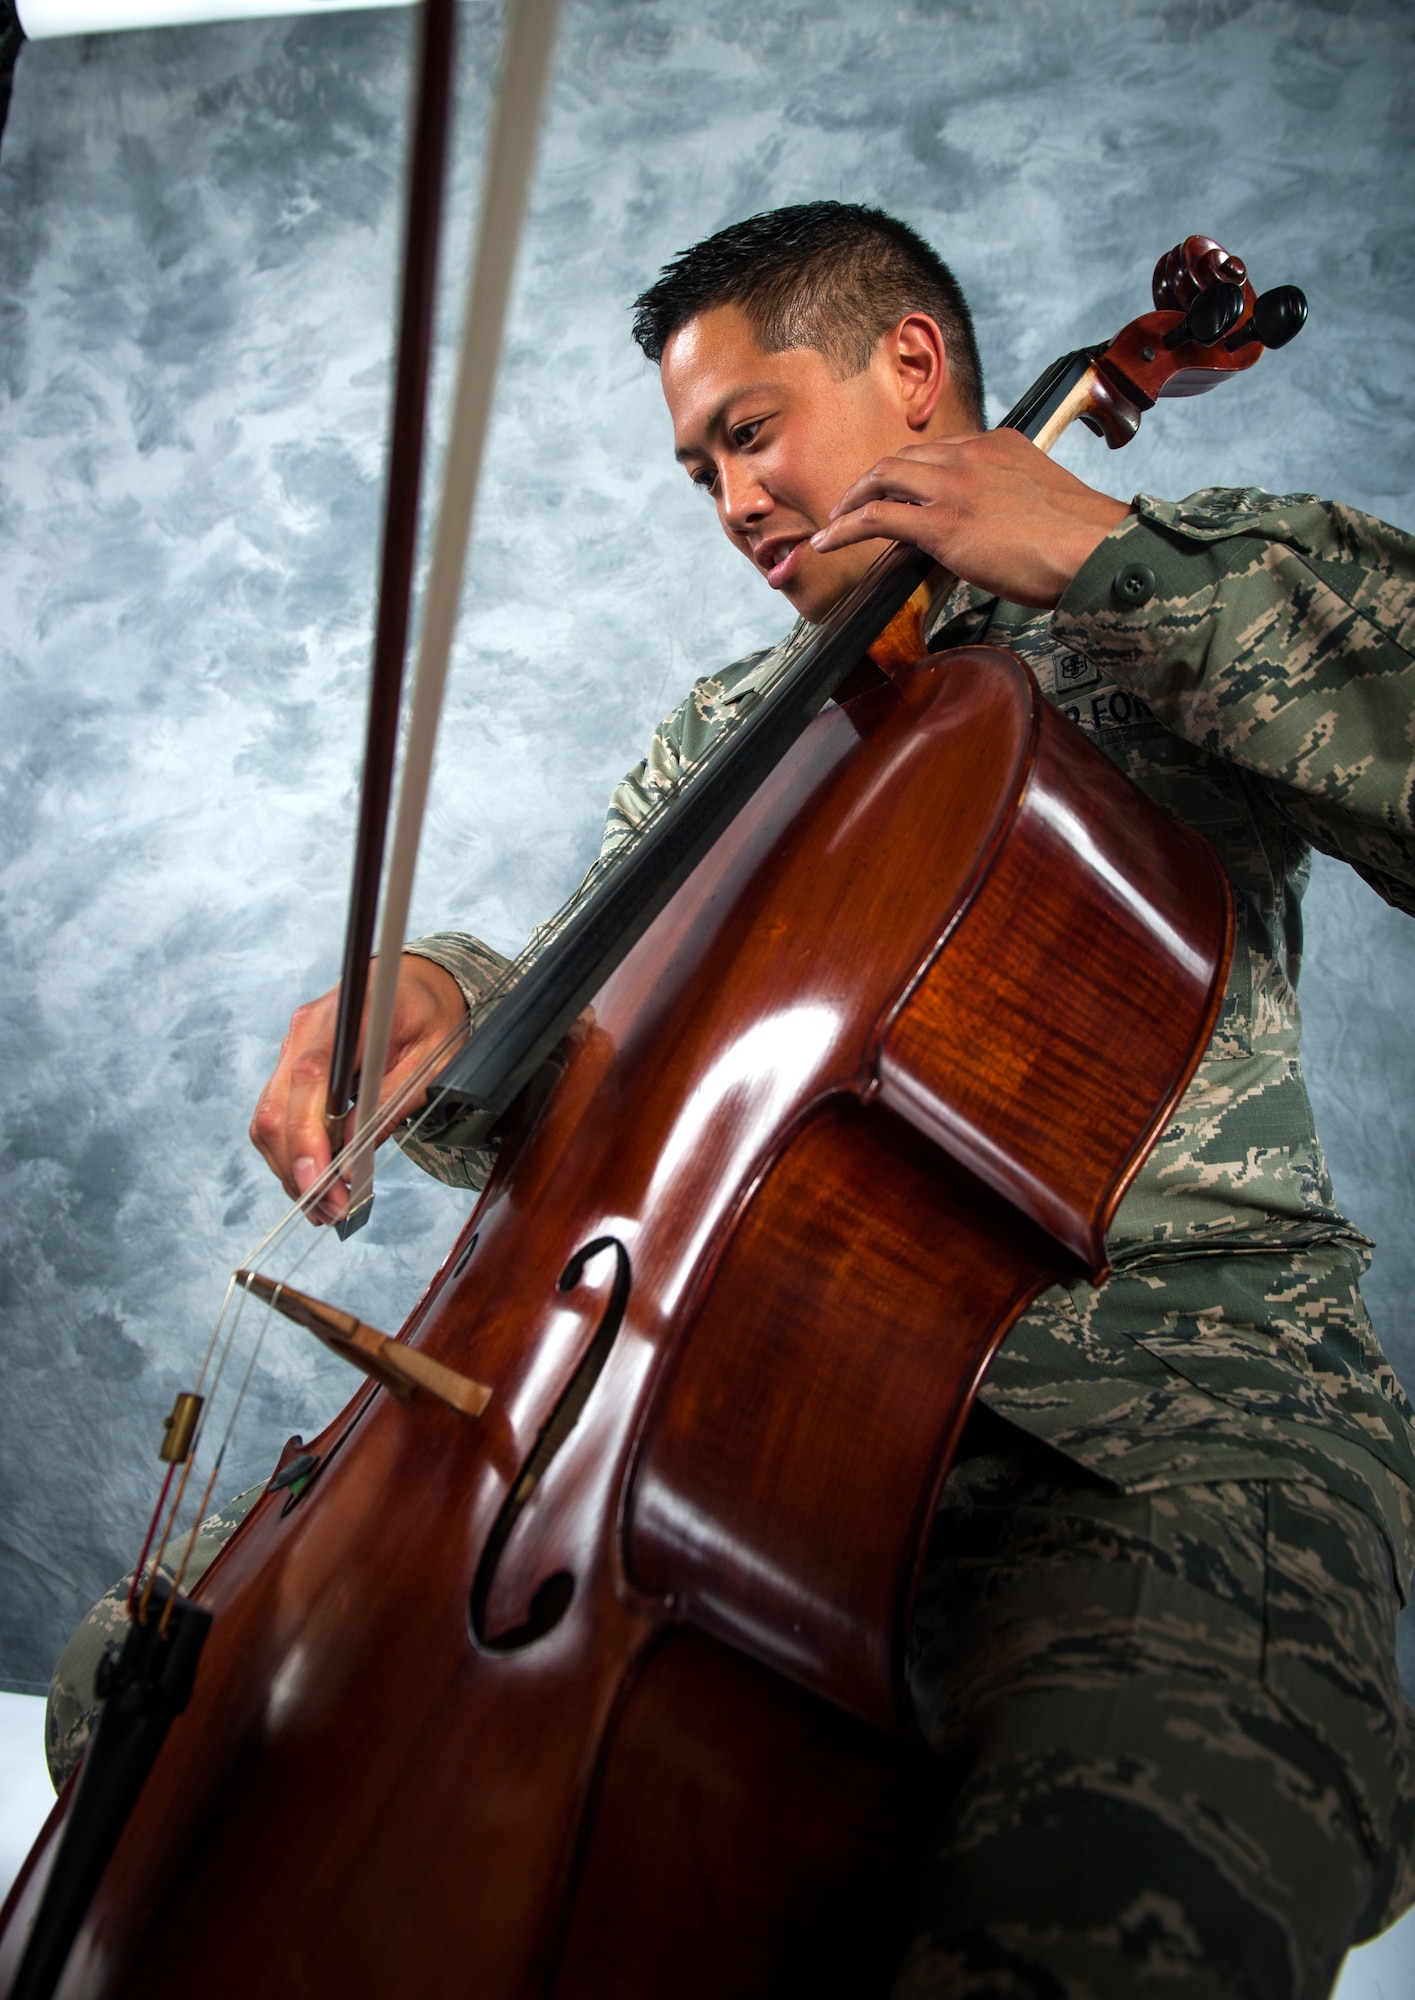 U.S. Air Force Staff Sgt. Joey Lee, 23d Aerospace Medicine Squadron public health technician, plays his cello at Moody Air Force Base, Ga., Sept. 12, 2013. Lee’s favorite style of music to play is classical, and he said he thinks the cello has the best solos. (U.S. Air Force photo by Senior Airman Jarrod Grammel/Released)
